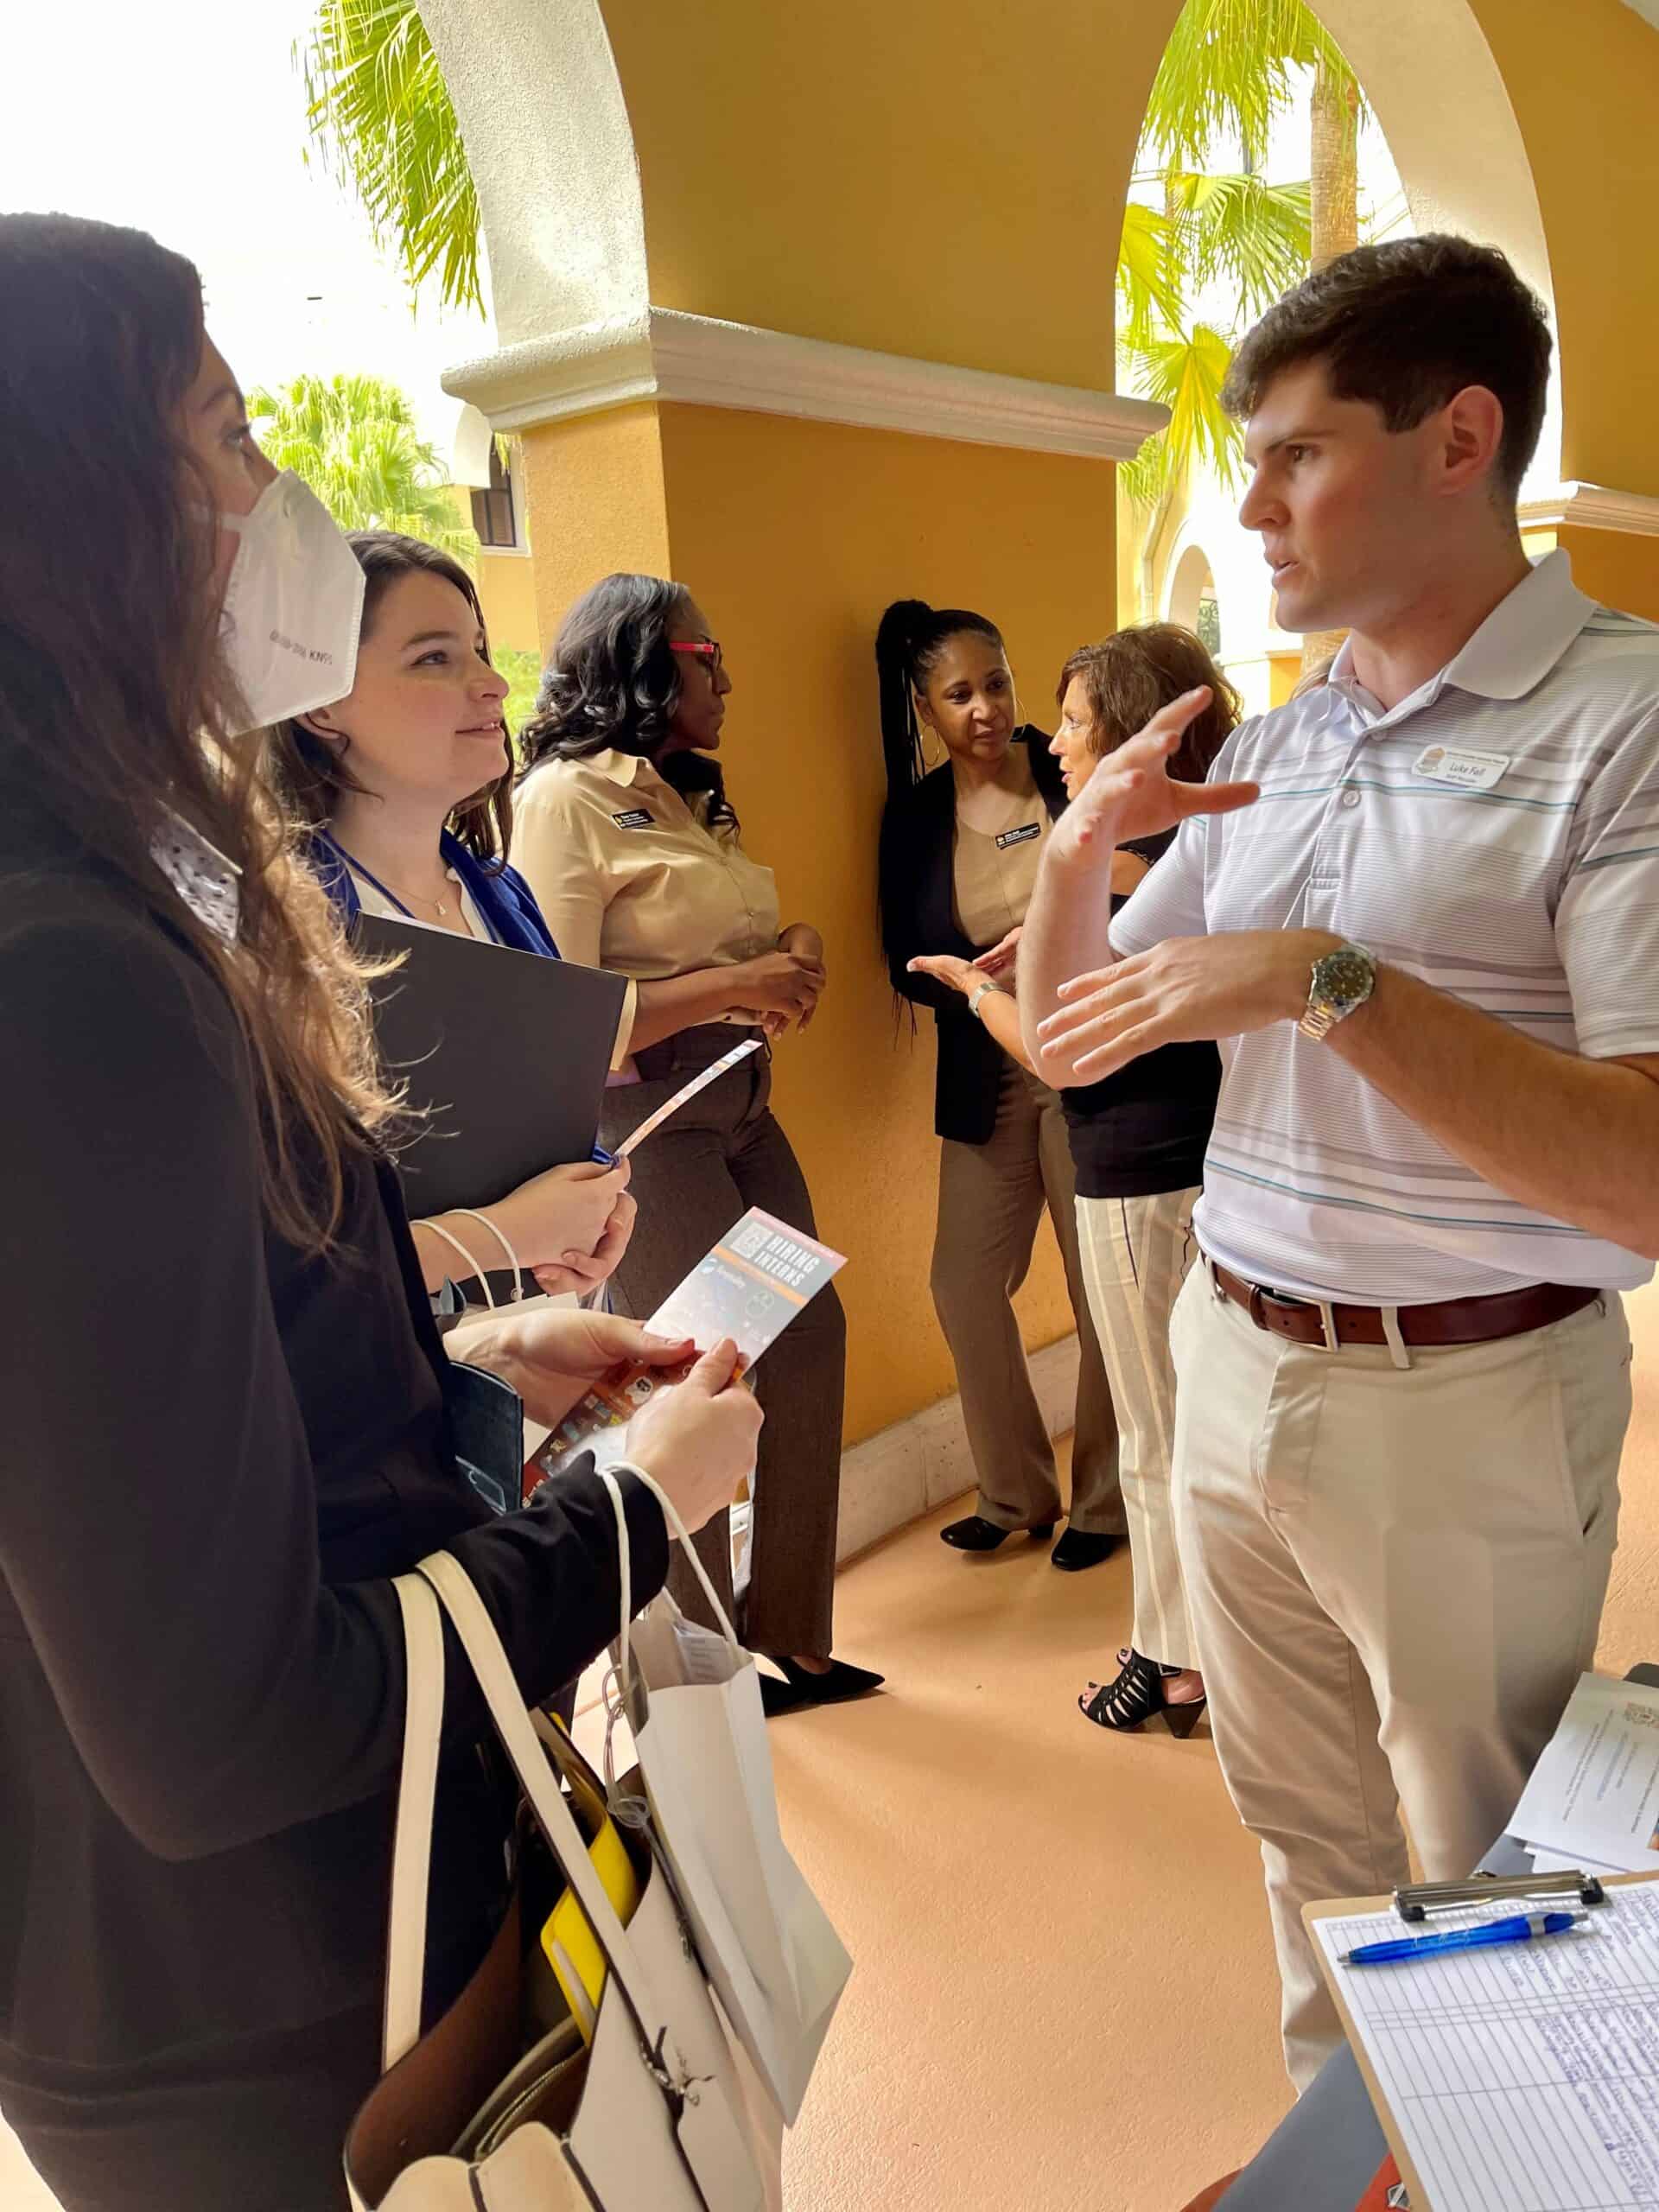 SHIP representative speaking to students at a hiring event